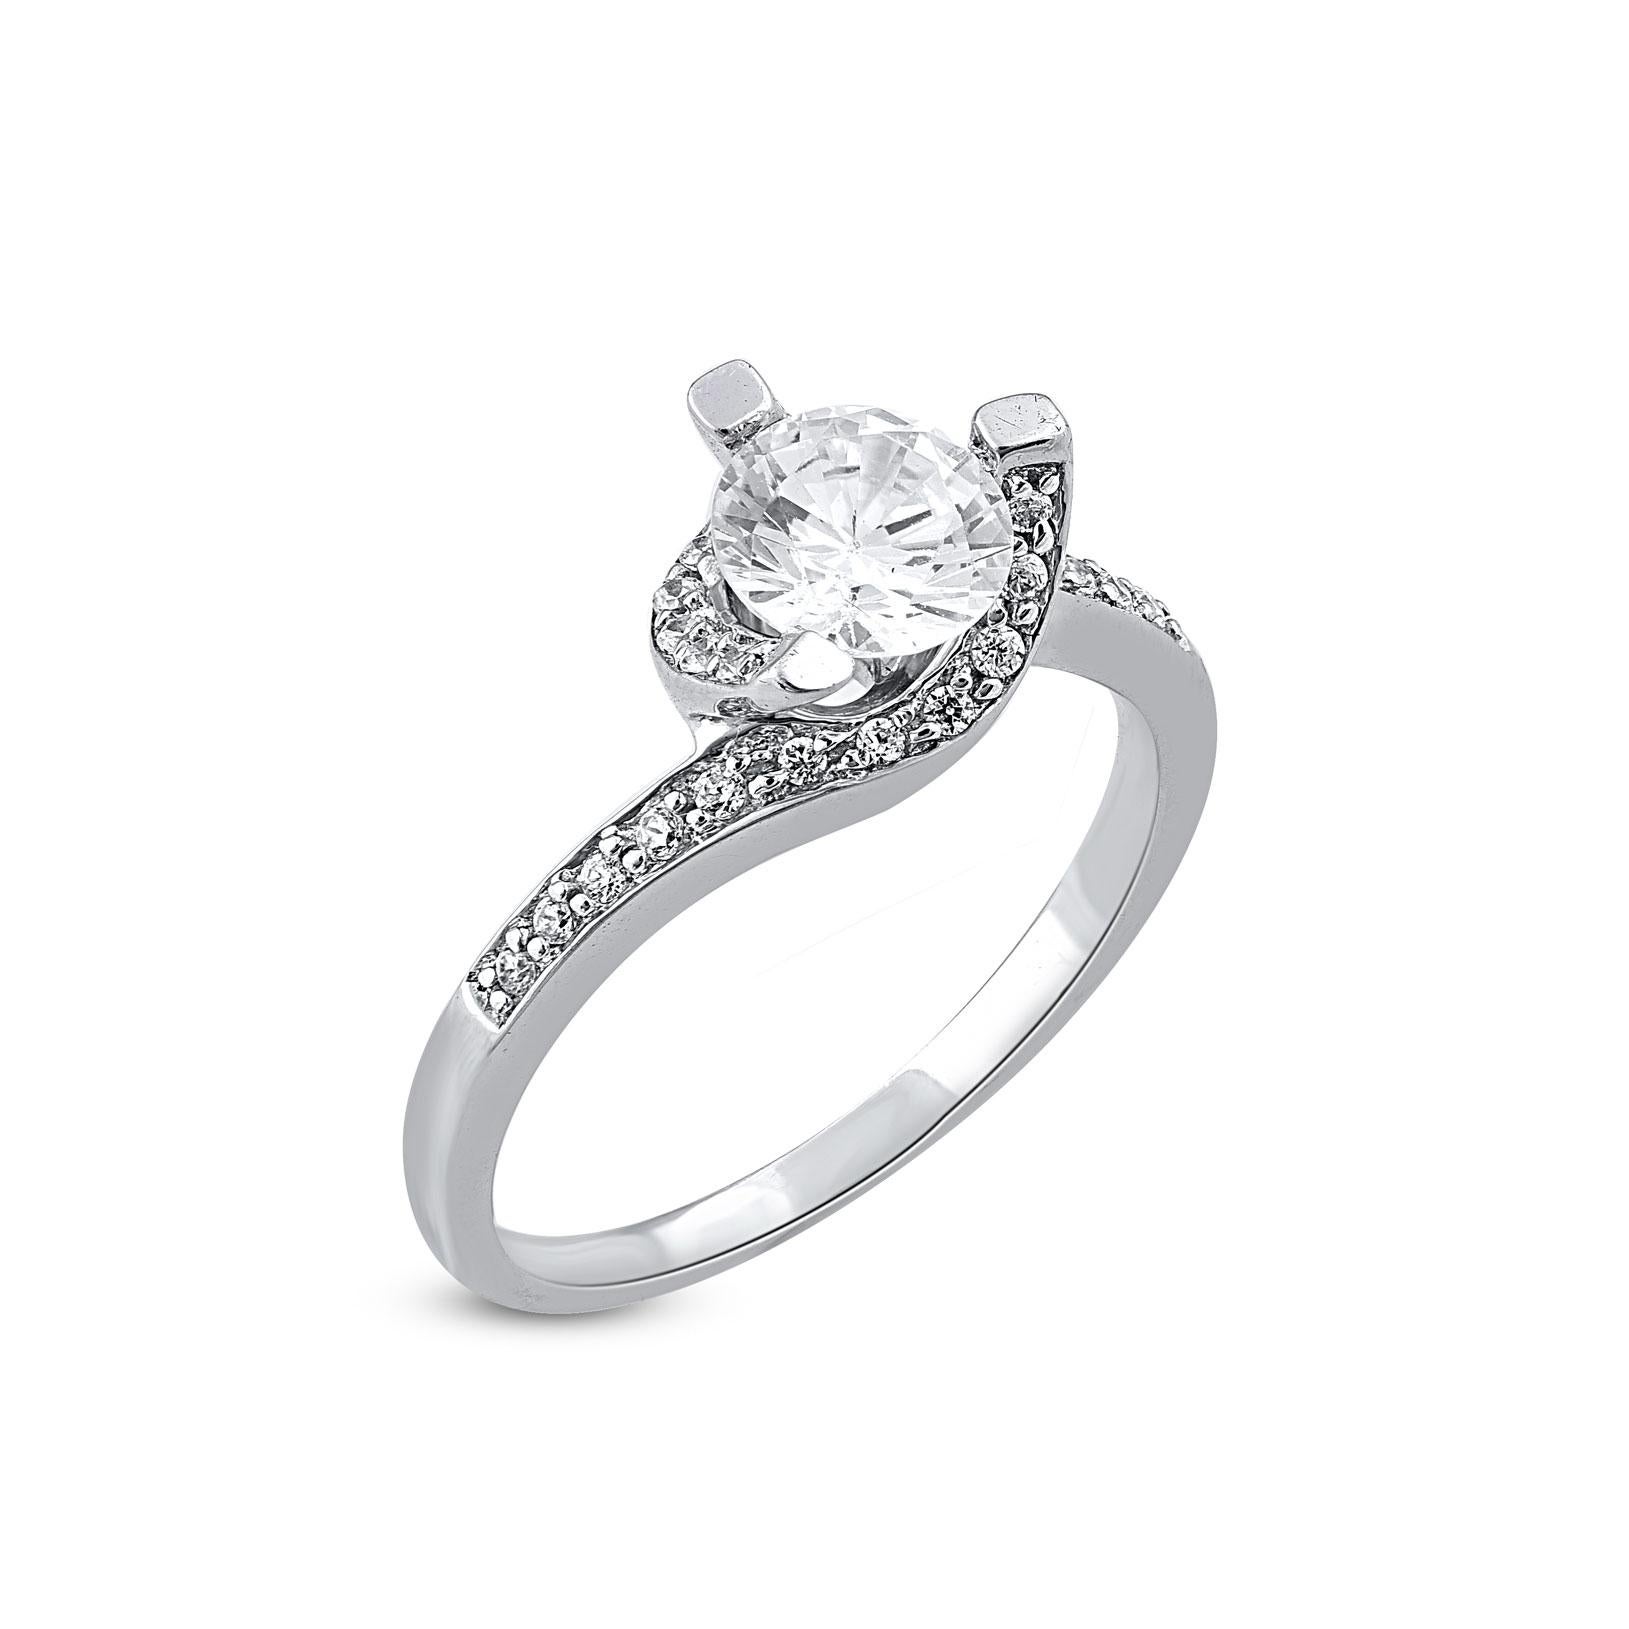 Bring charm to your look with this engagement ring. This ring is features 1.00 ct Centre stone and 0.12 ct shoulder diamonds and its crafted in 18 karat gold and features 25 round diamond set in pave setting and it shines in G-H color SI1 clarity.